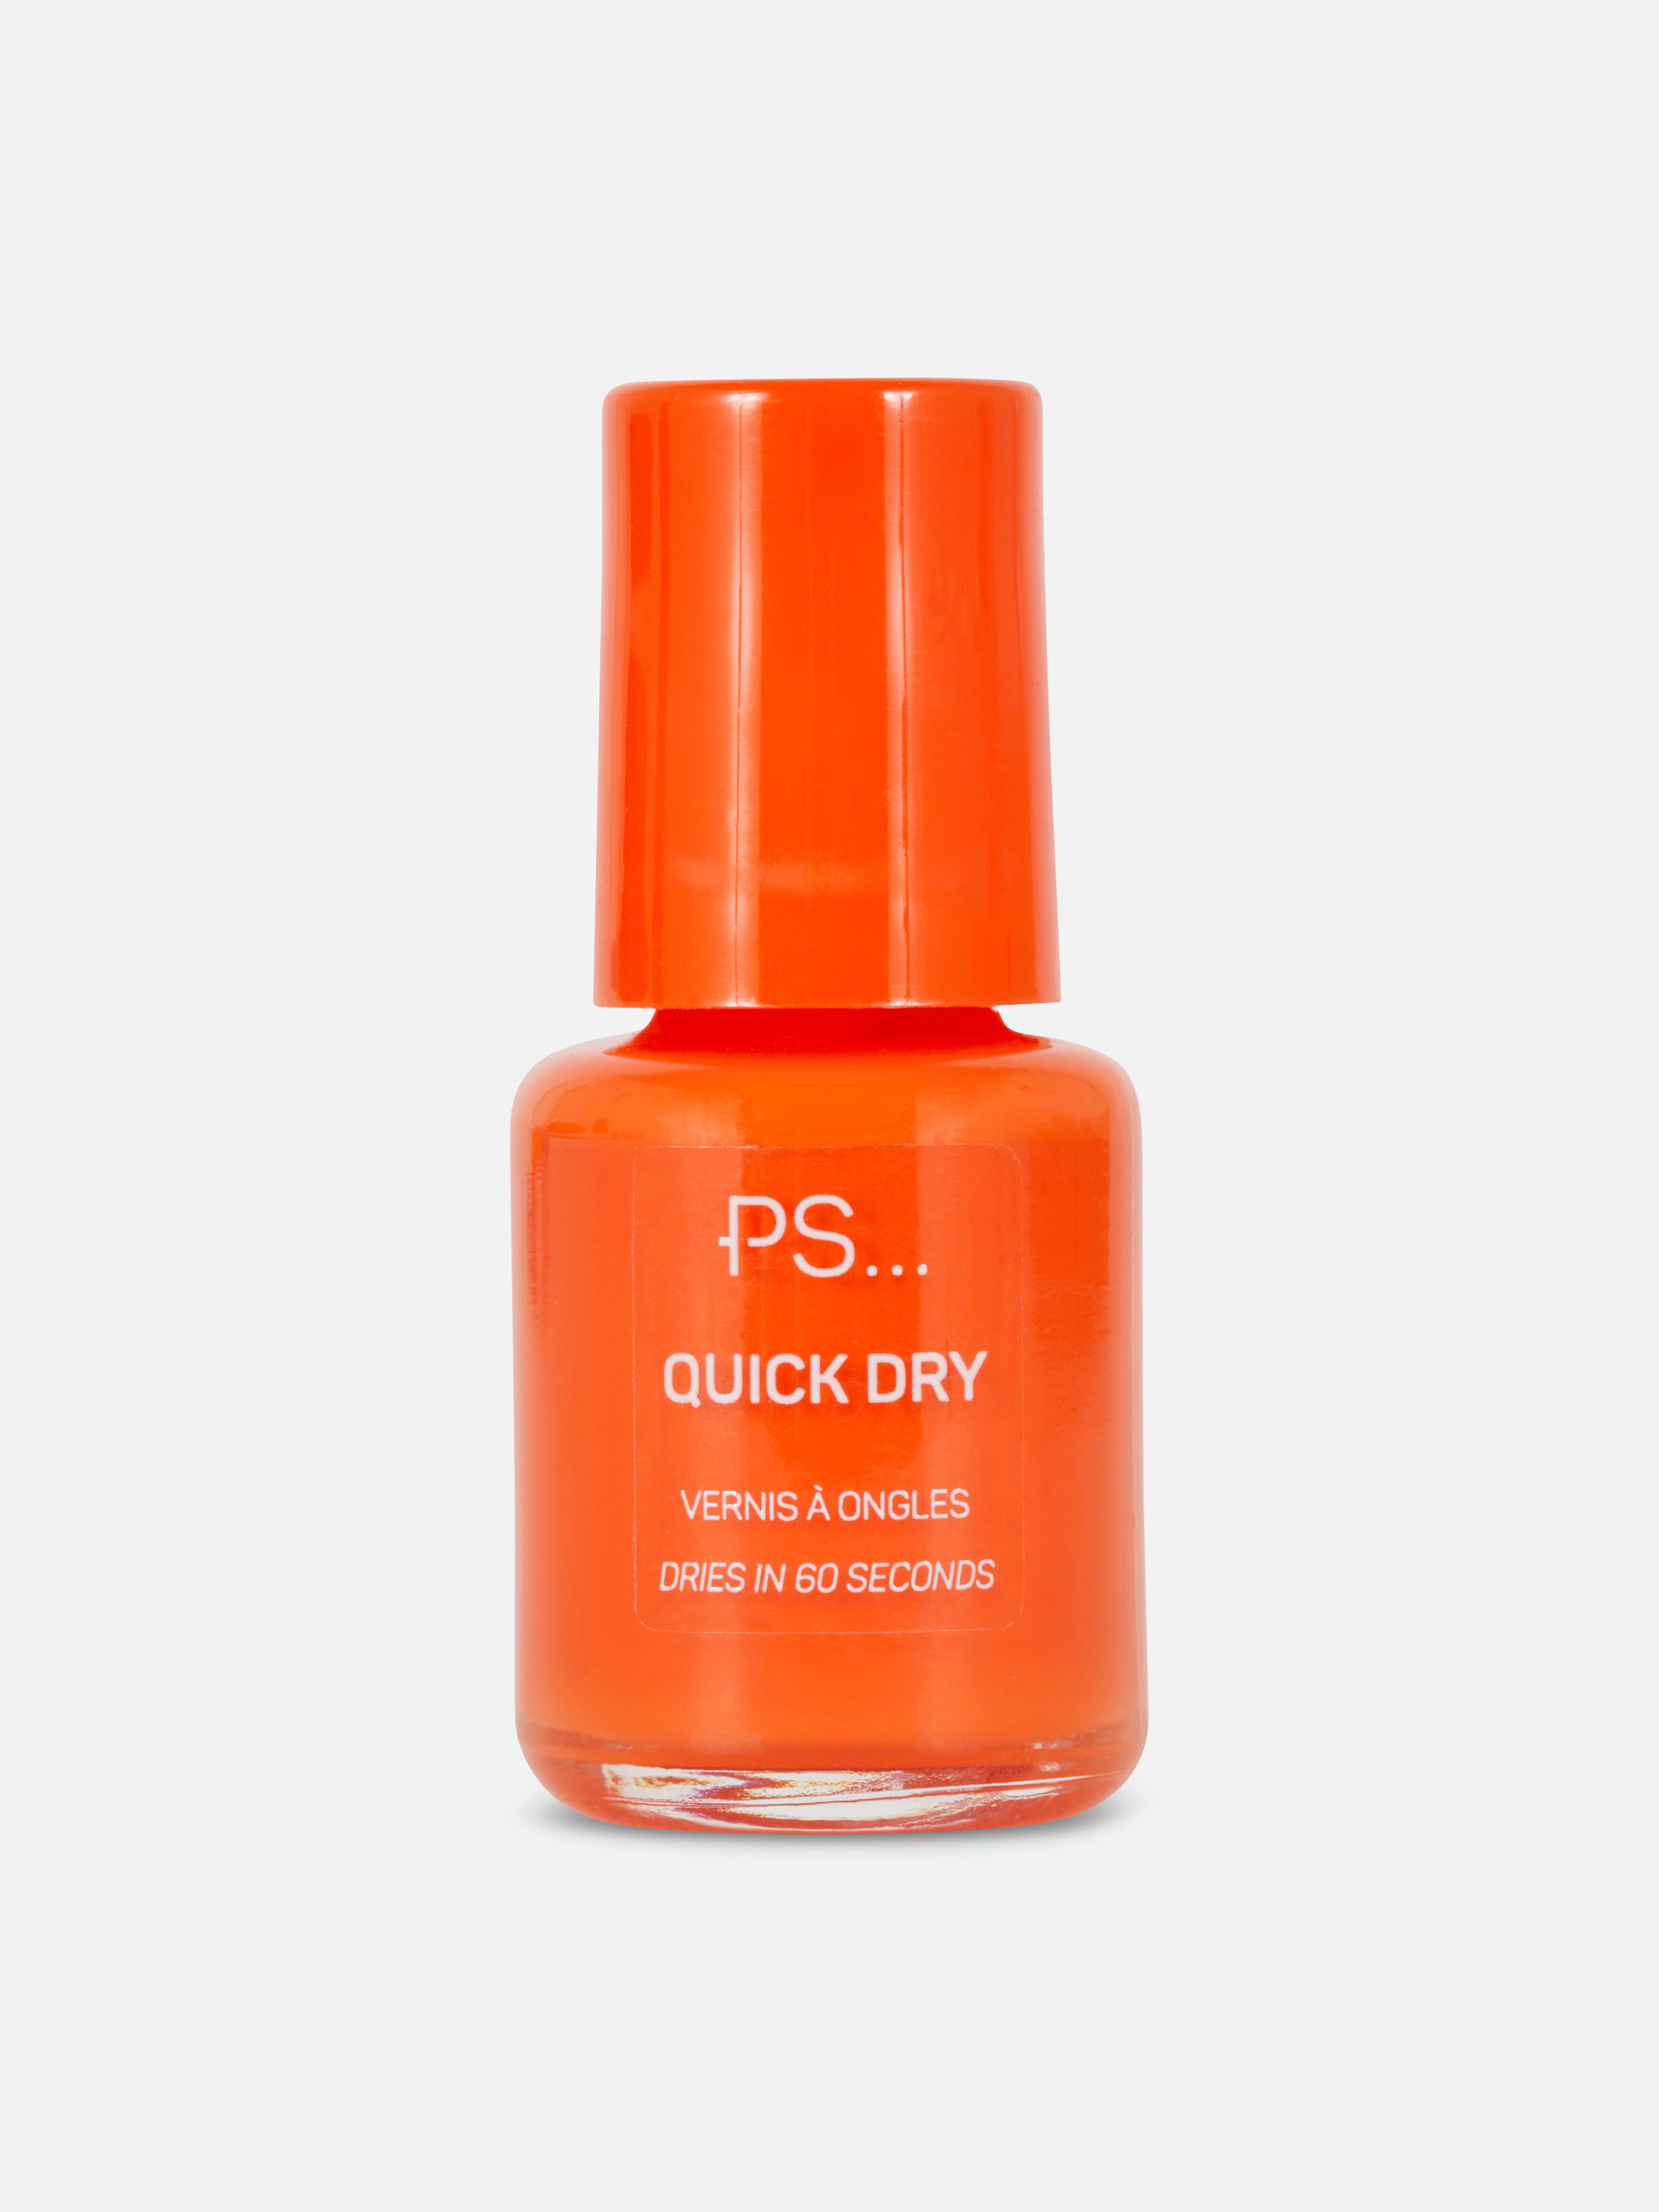 Primark PS Quick Dry Nail Polish review - Rachael Divers